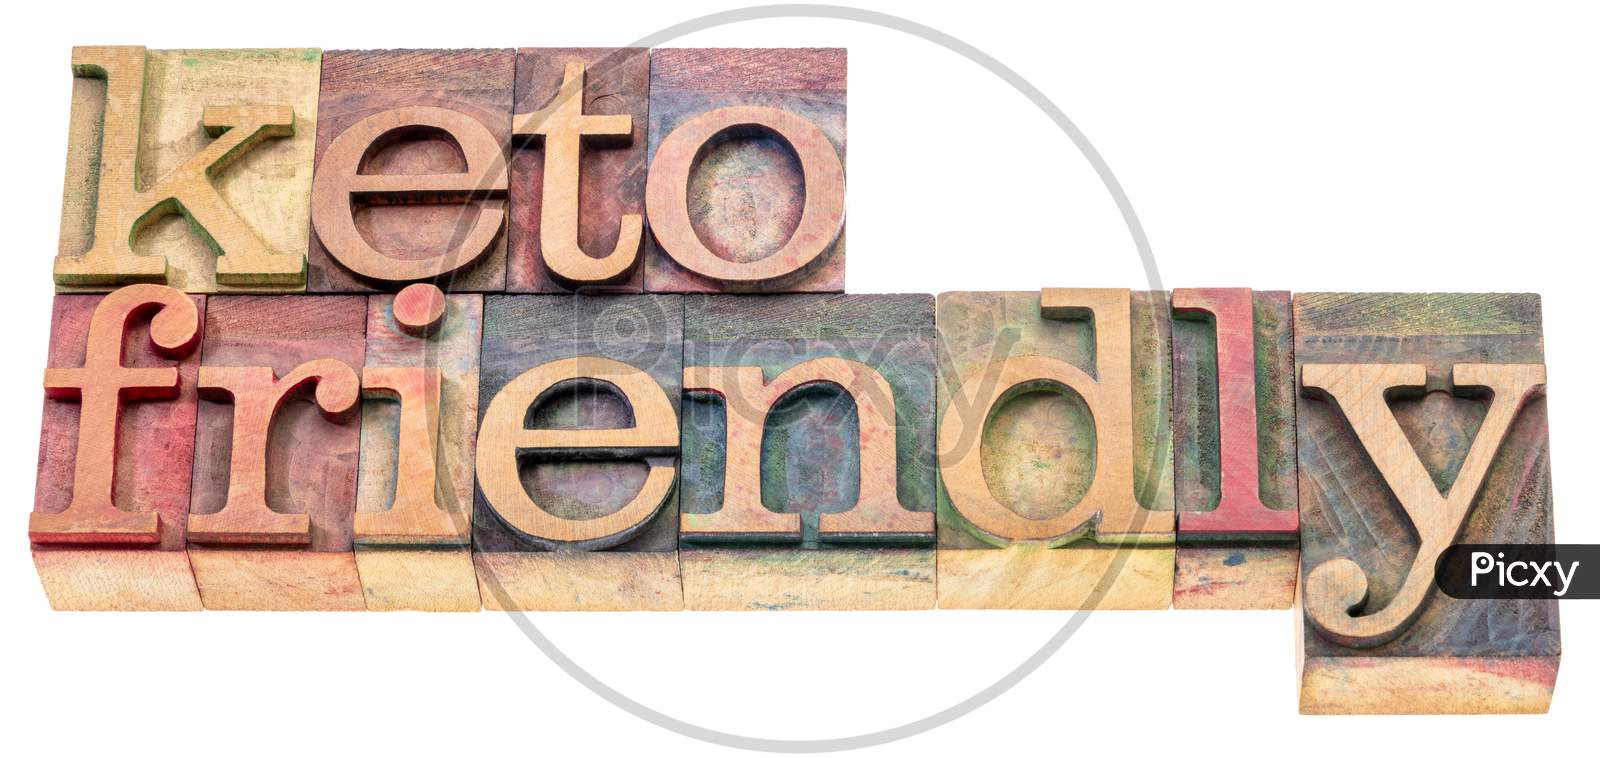 Keto Friendly Isolated Word Abstract In Vintage Letterpress Wood Type, High Fat And Low Carbs Ketogenic Diet Concept